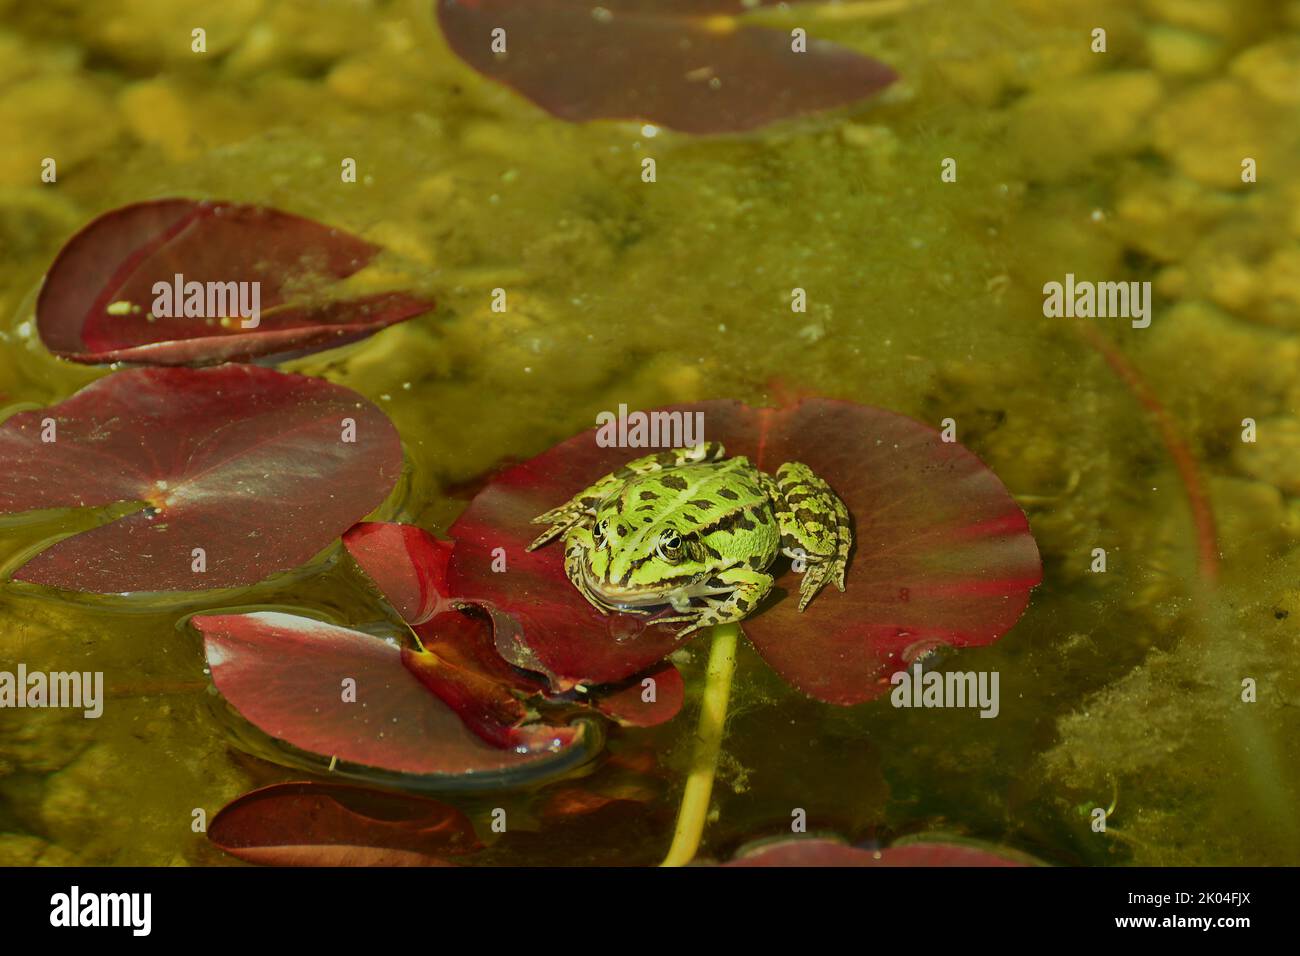 Pool Frog (Pelophylax lessonae) standing on a aquatic plant in a pond Stock Photo